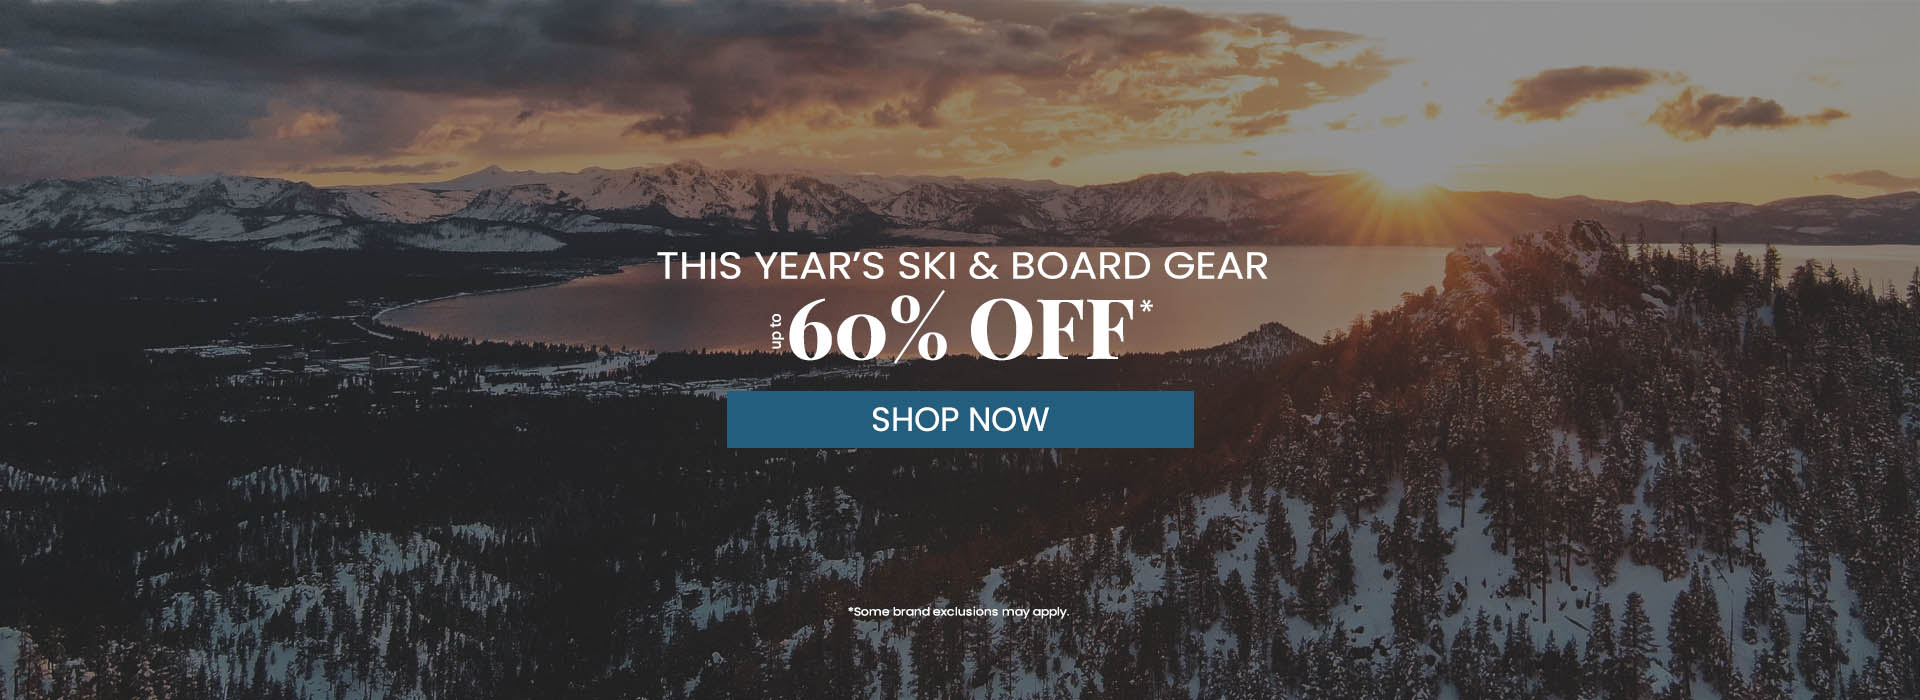 Save up to 60% OFF this year's ski & board gear at BlueZone Sports!